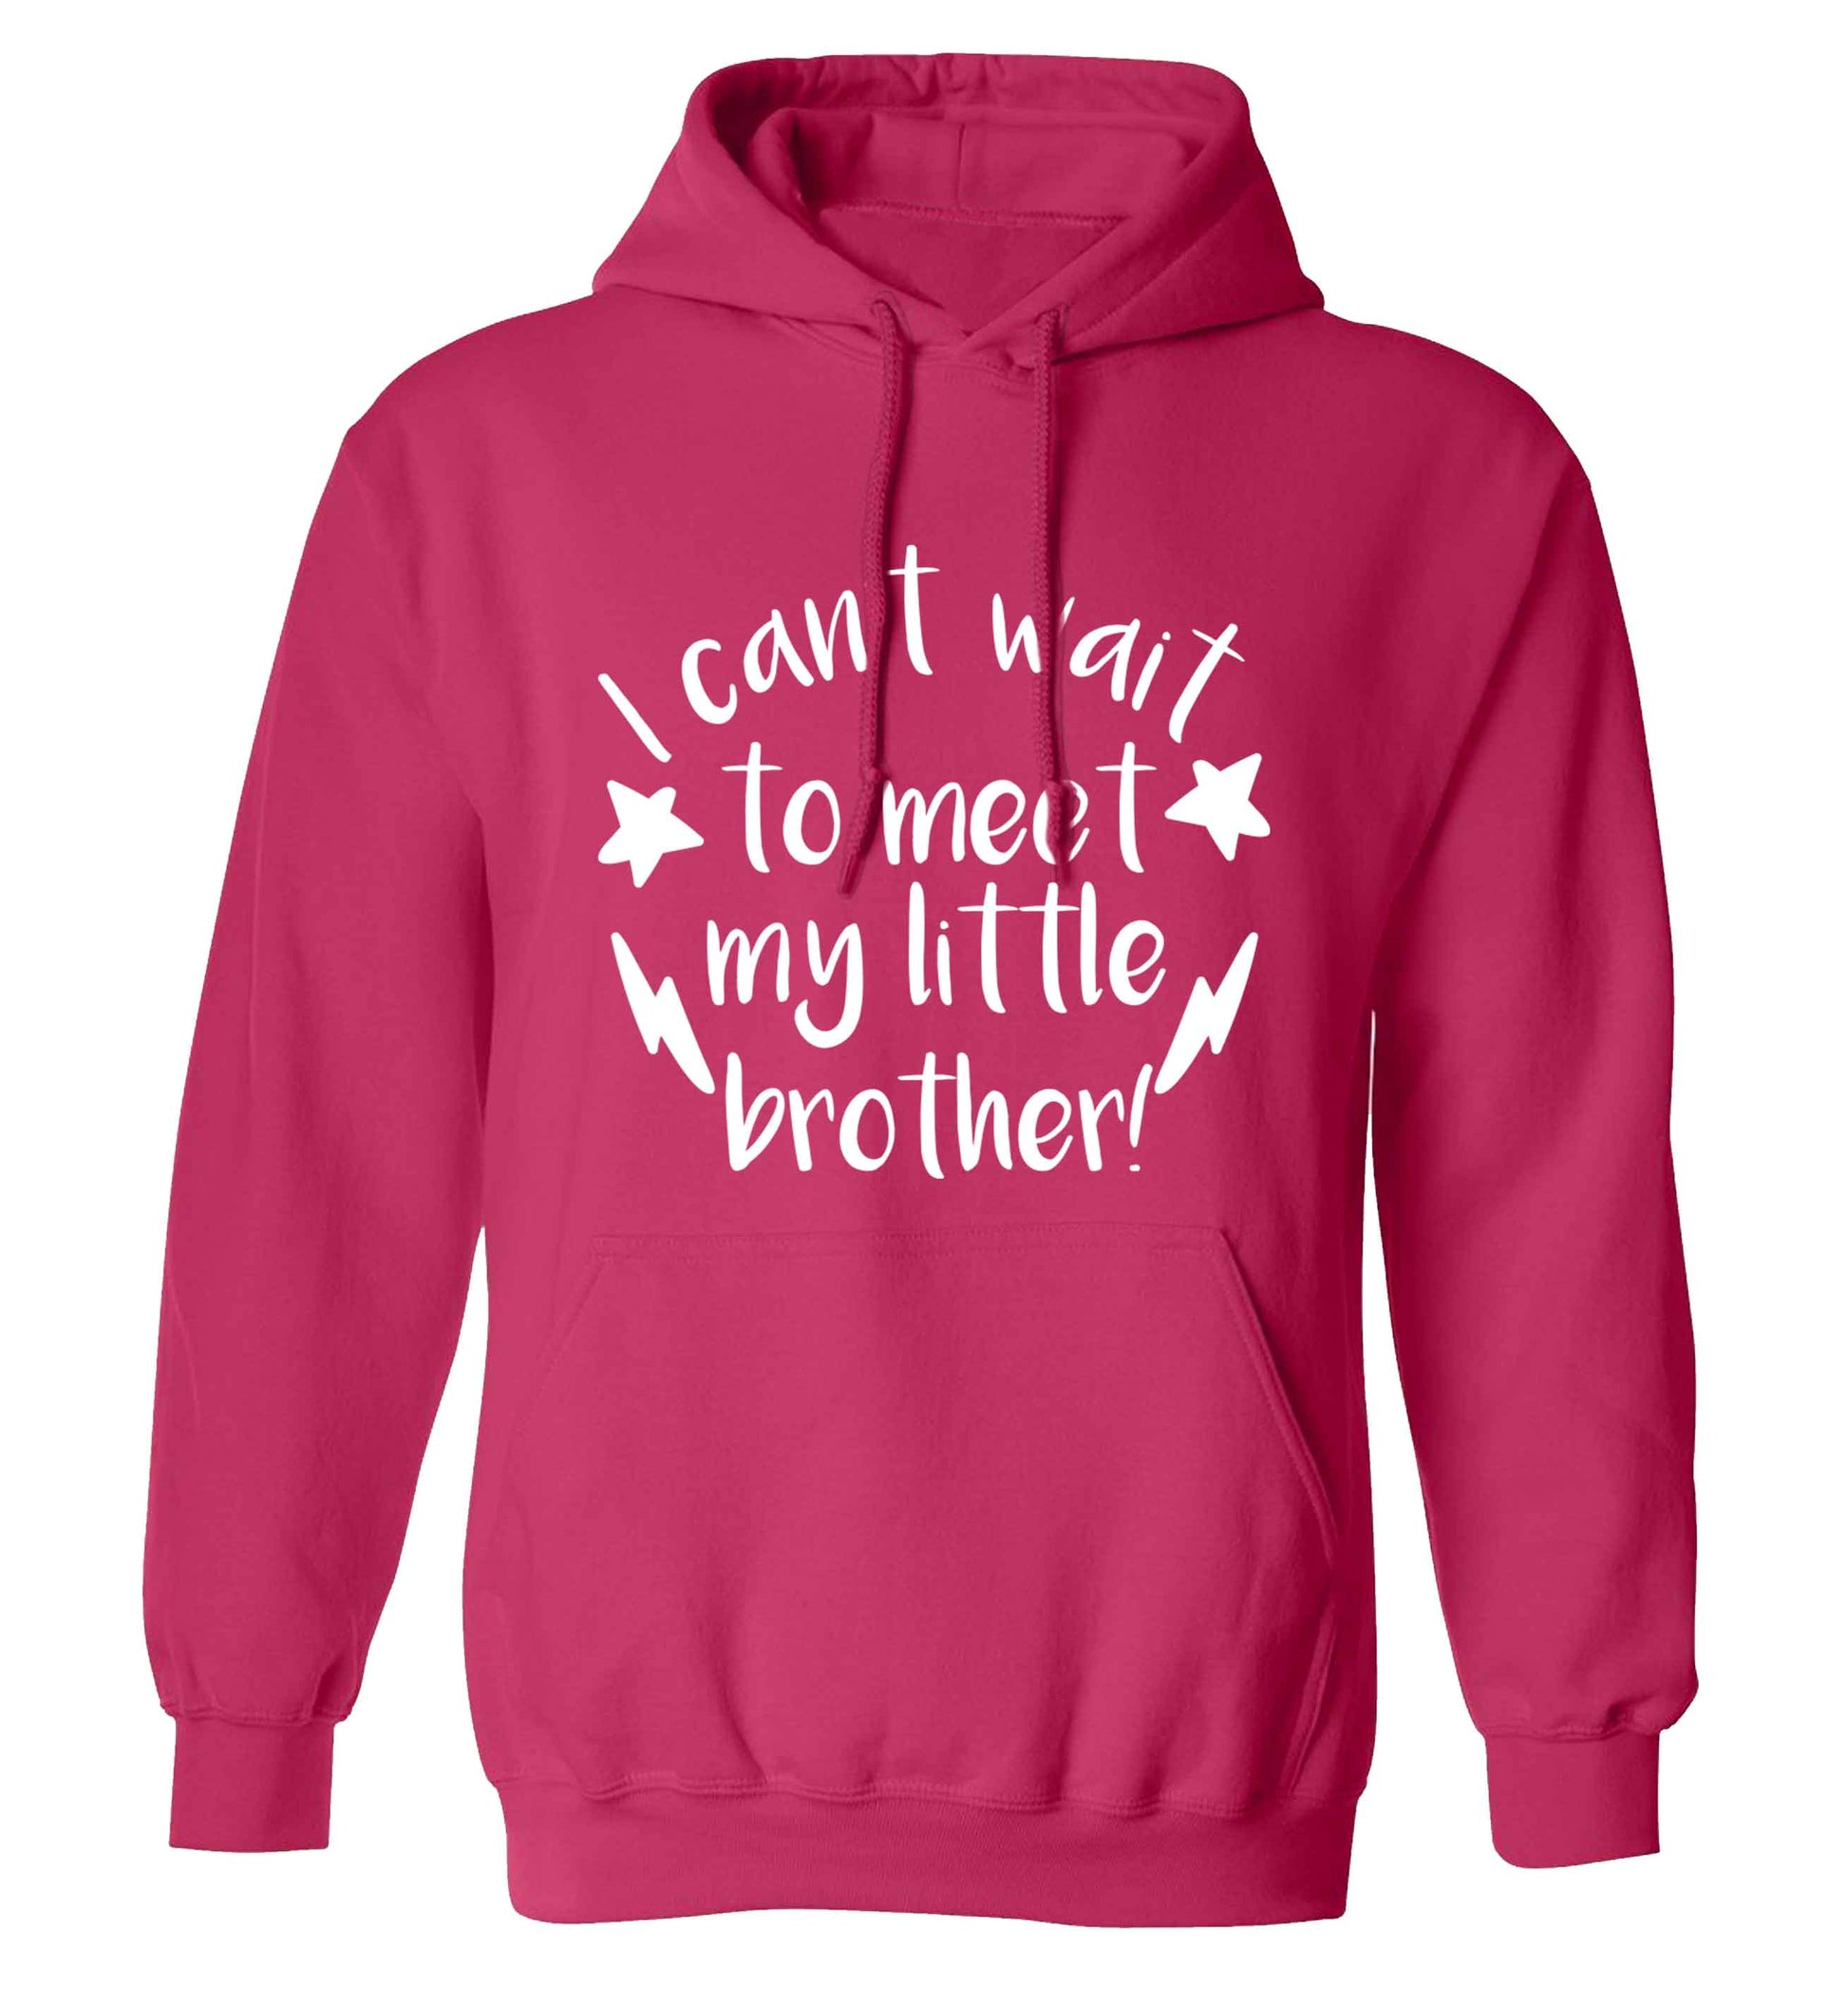 I can't wait to meet my sister! adults unisex pink hoodie 2XL